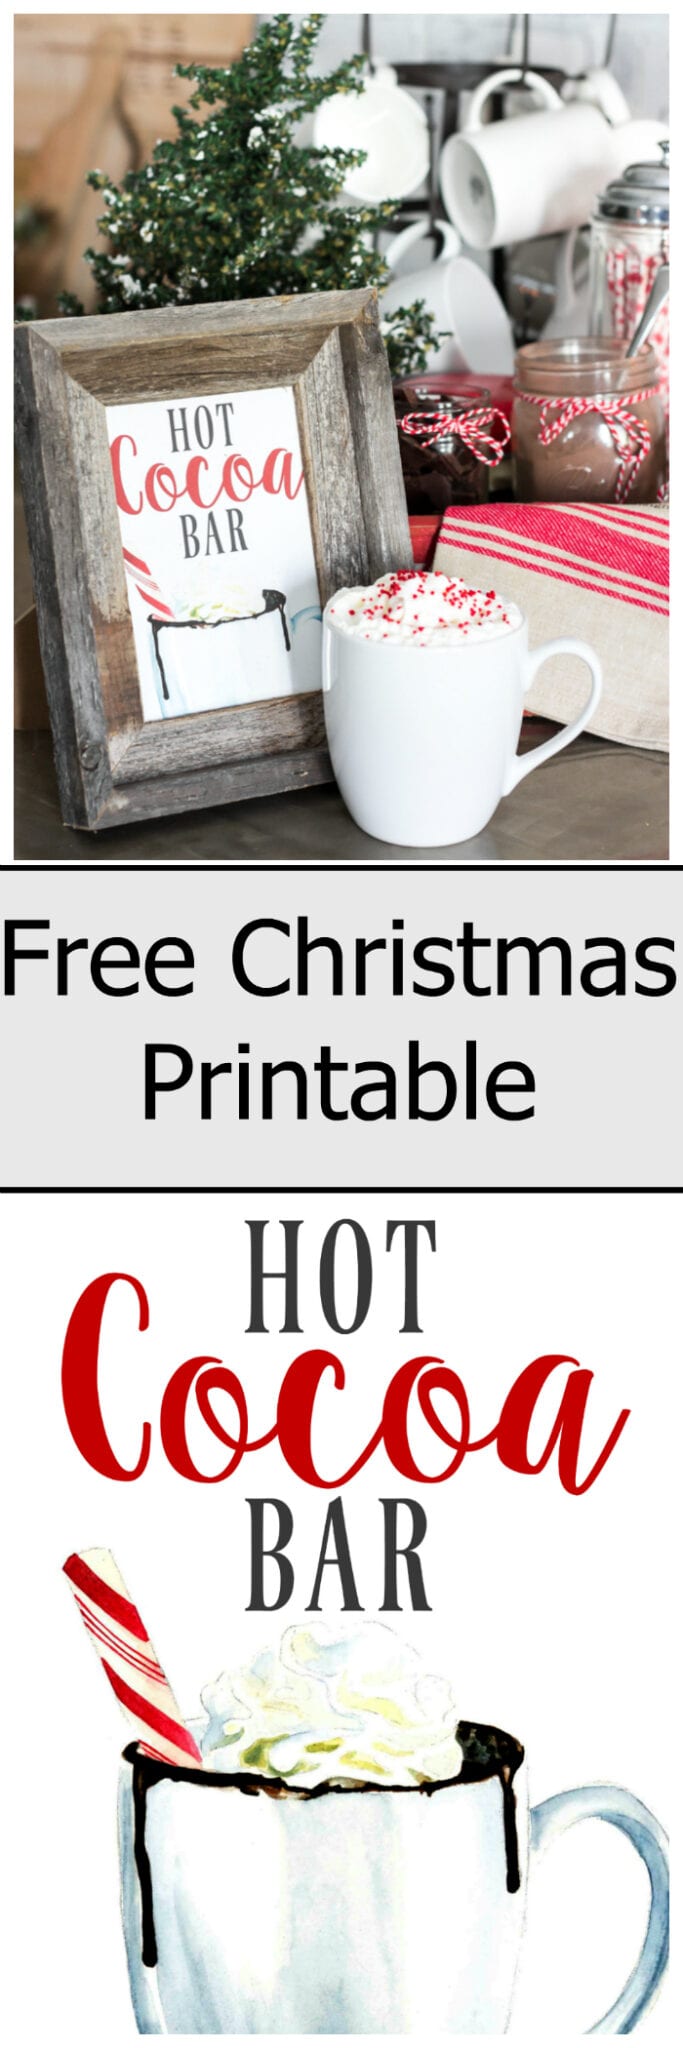 soda-crate-hot-cocoa-bar-free-printable-sign-bless-er-house